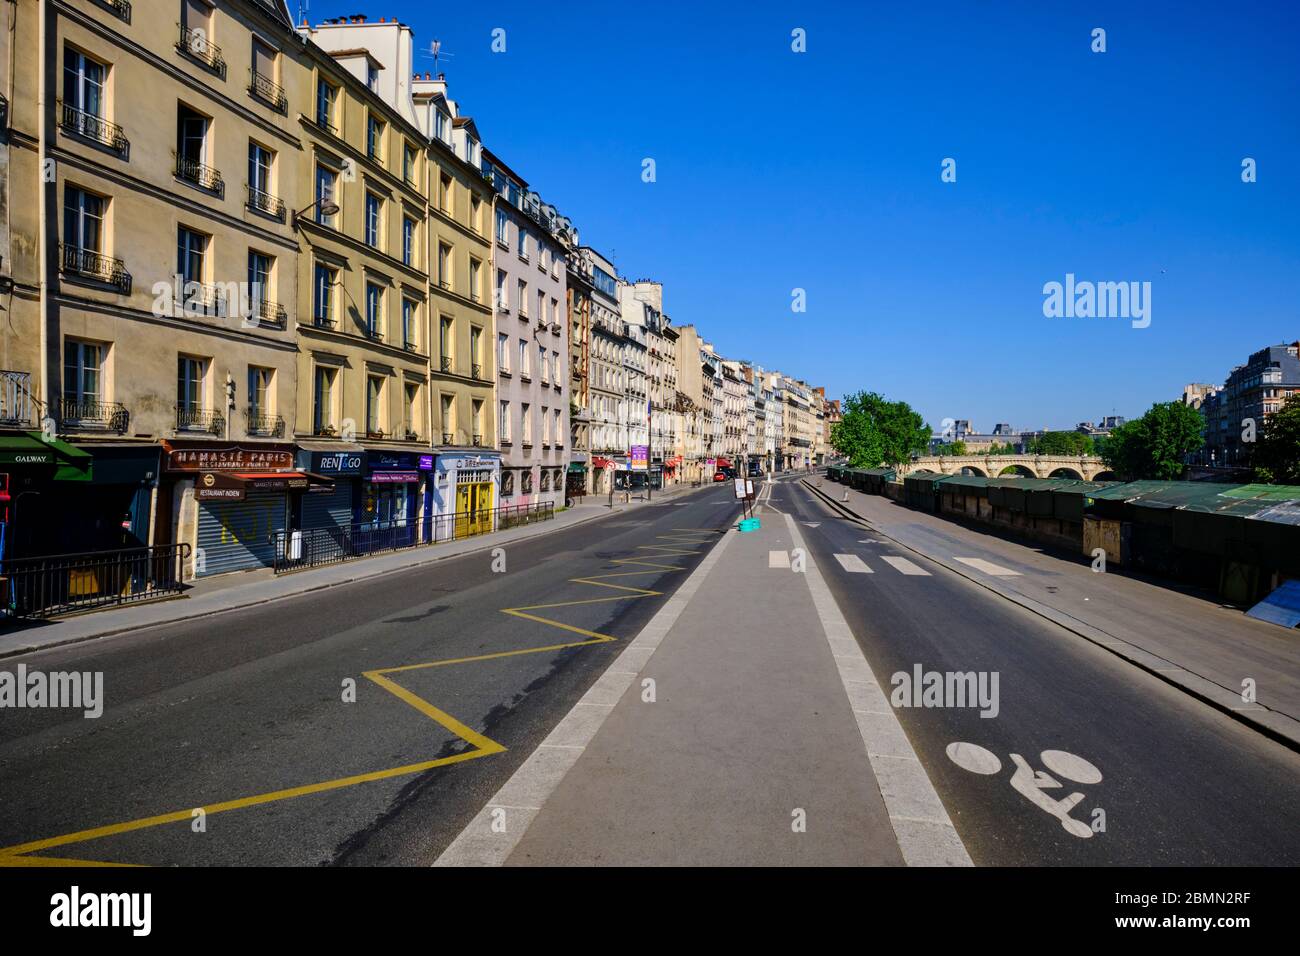 France, Paris, the quai des Grands Augustins during the lockdown of Covid 19 Stock Photo